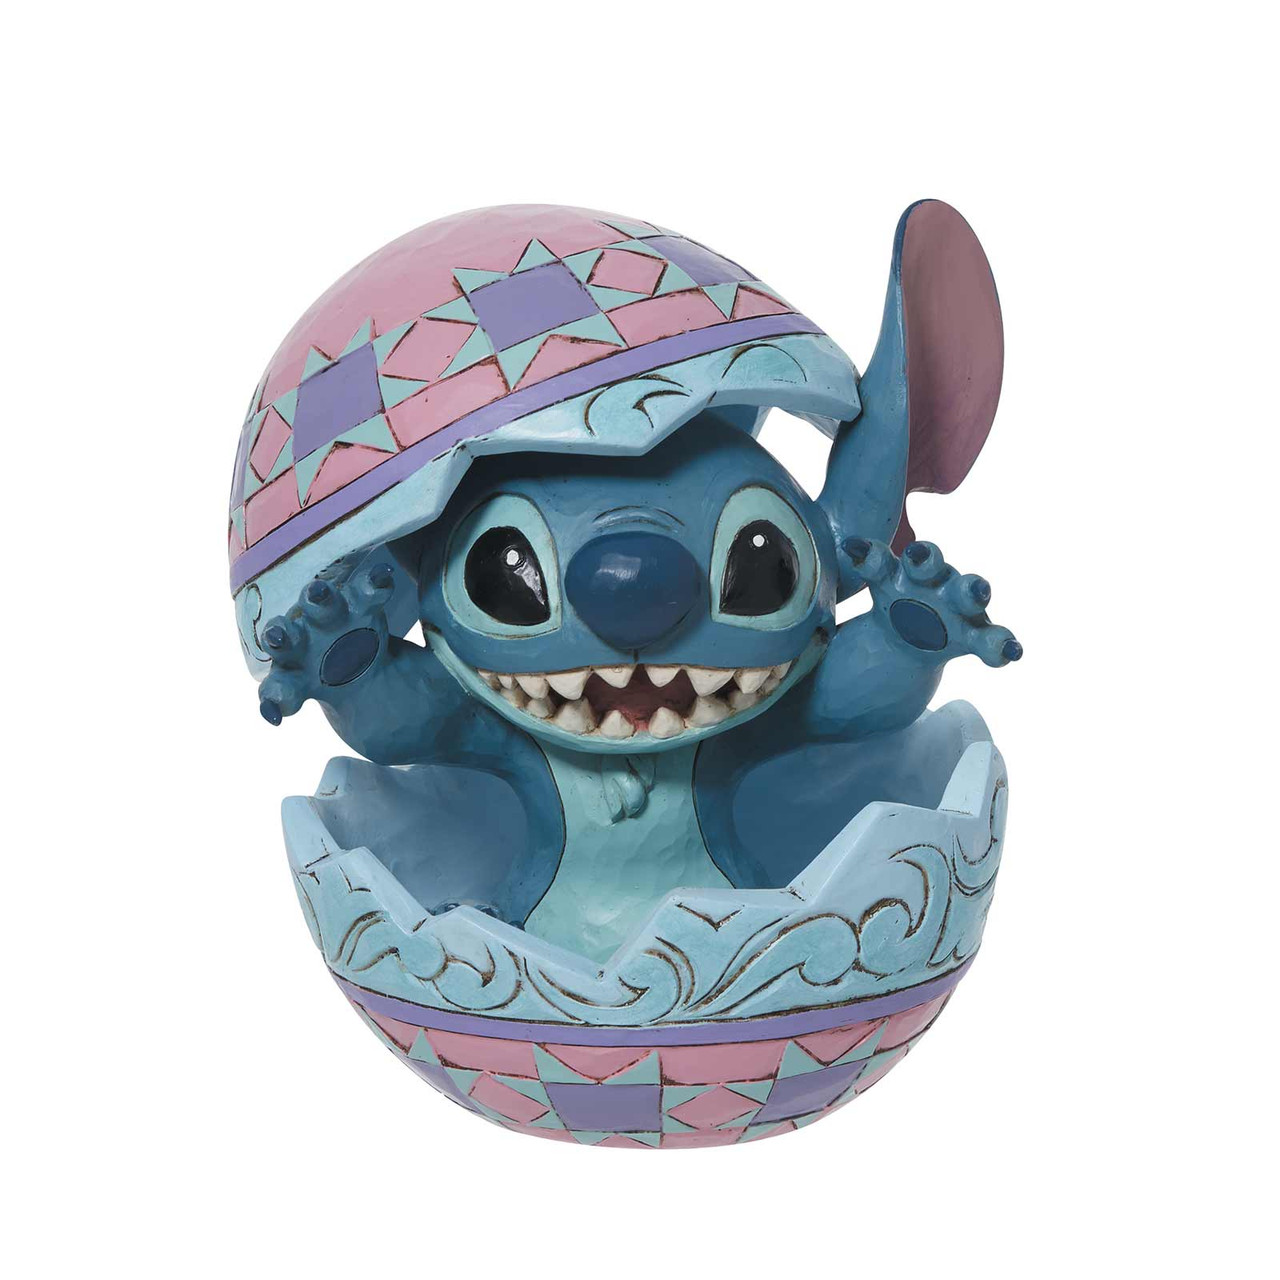 Disney Traditions Stitch in Easter Egg Figurine by Jim Shore, 6011919